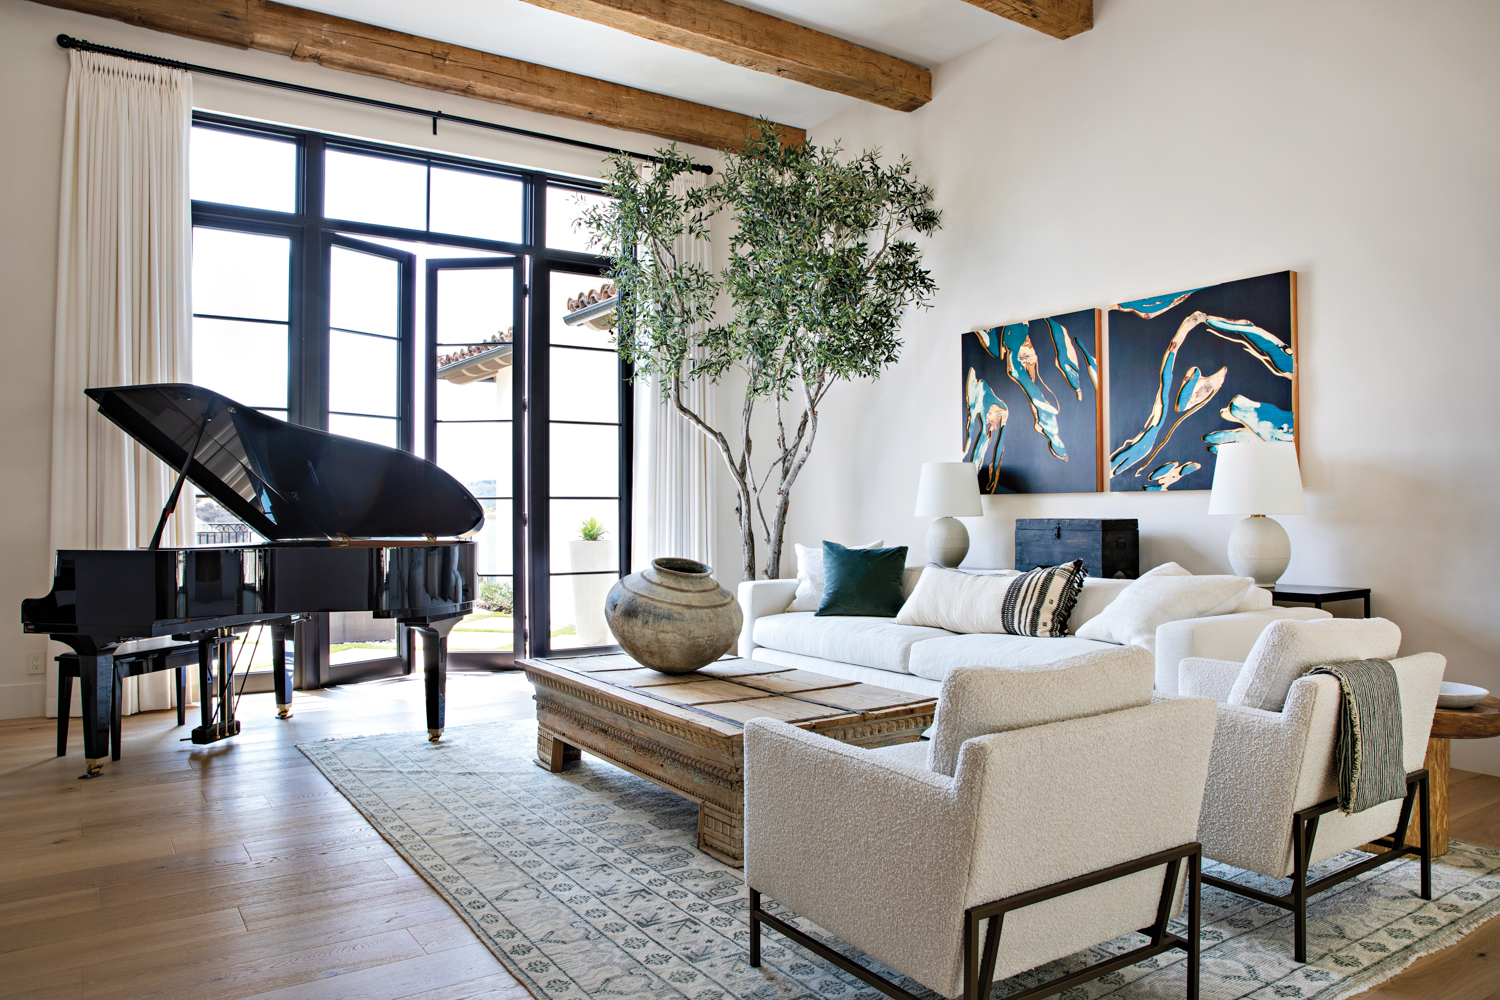 living room with baby grand piano, exposed wooden beams, white furnishings